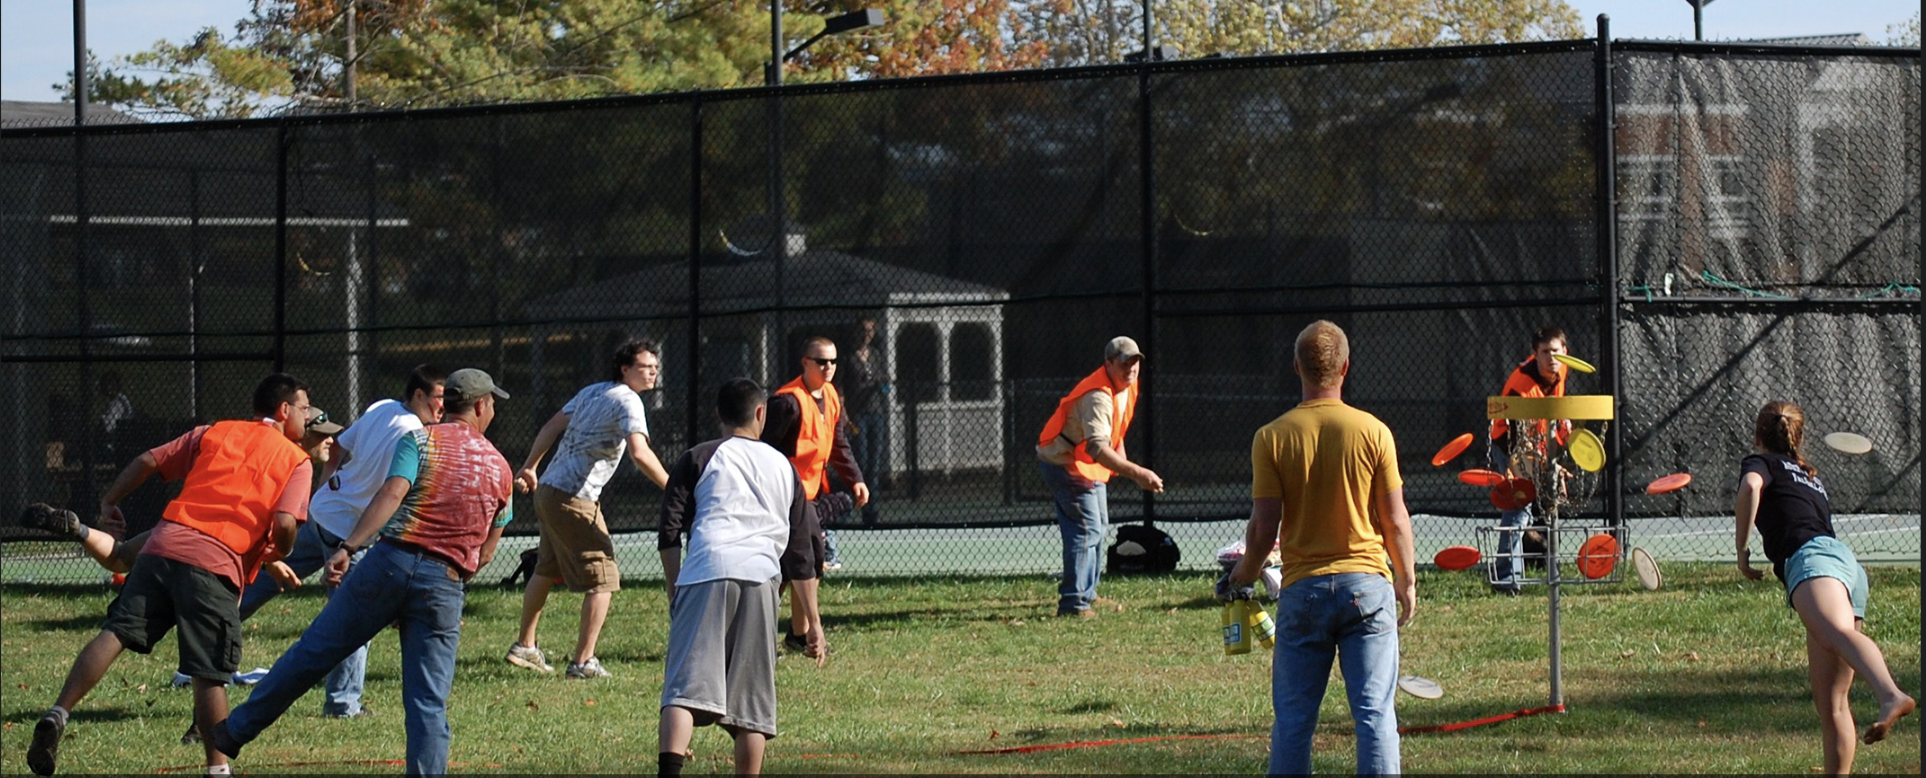 Students participate in disc golf at the colleges practice tee.